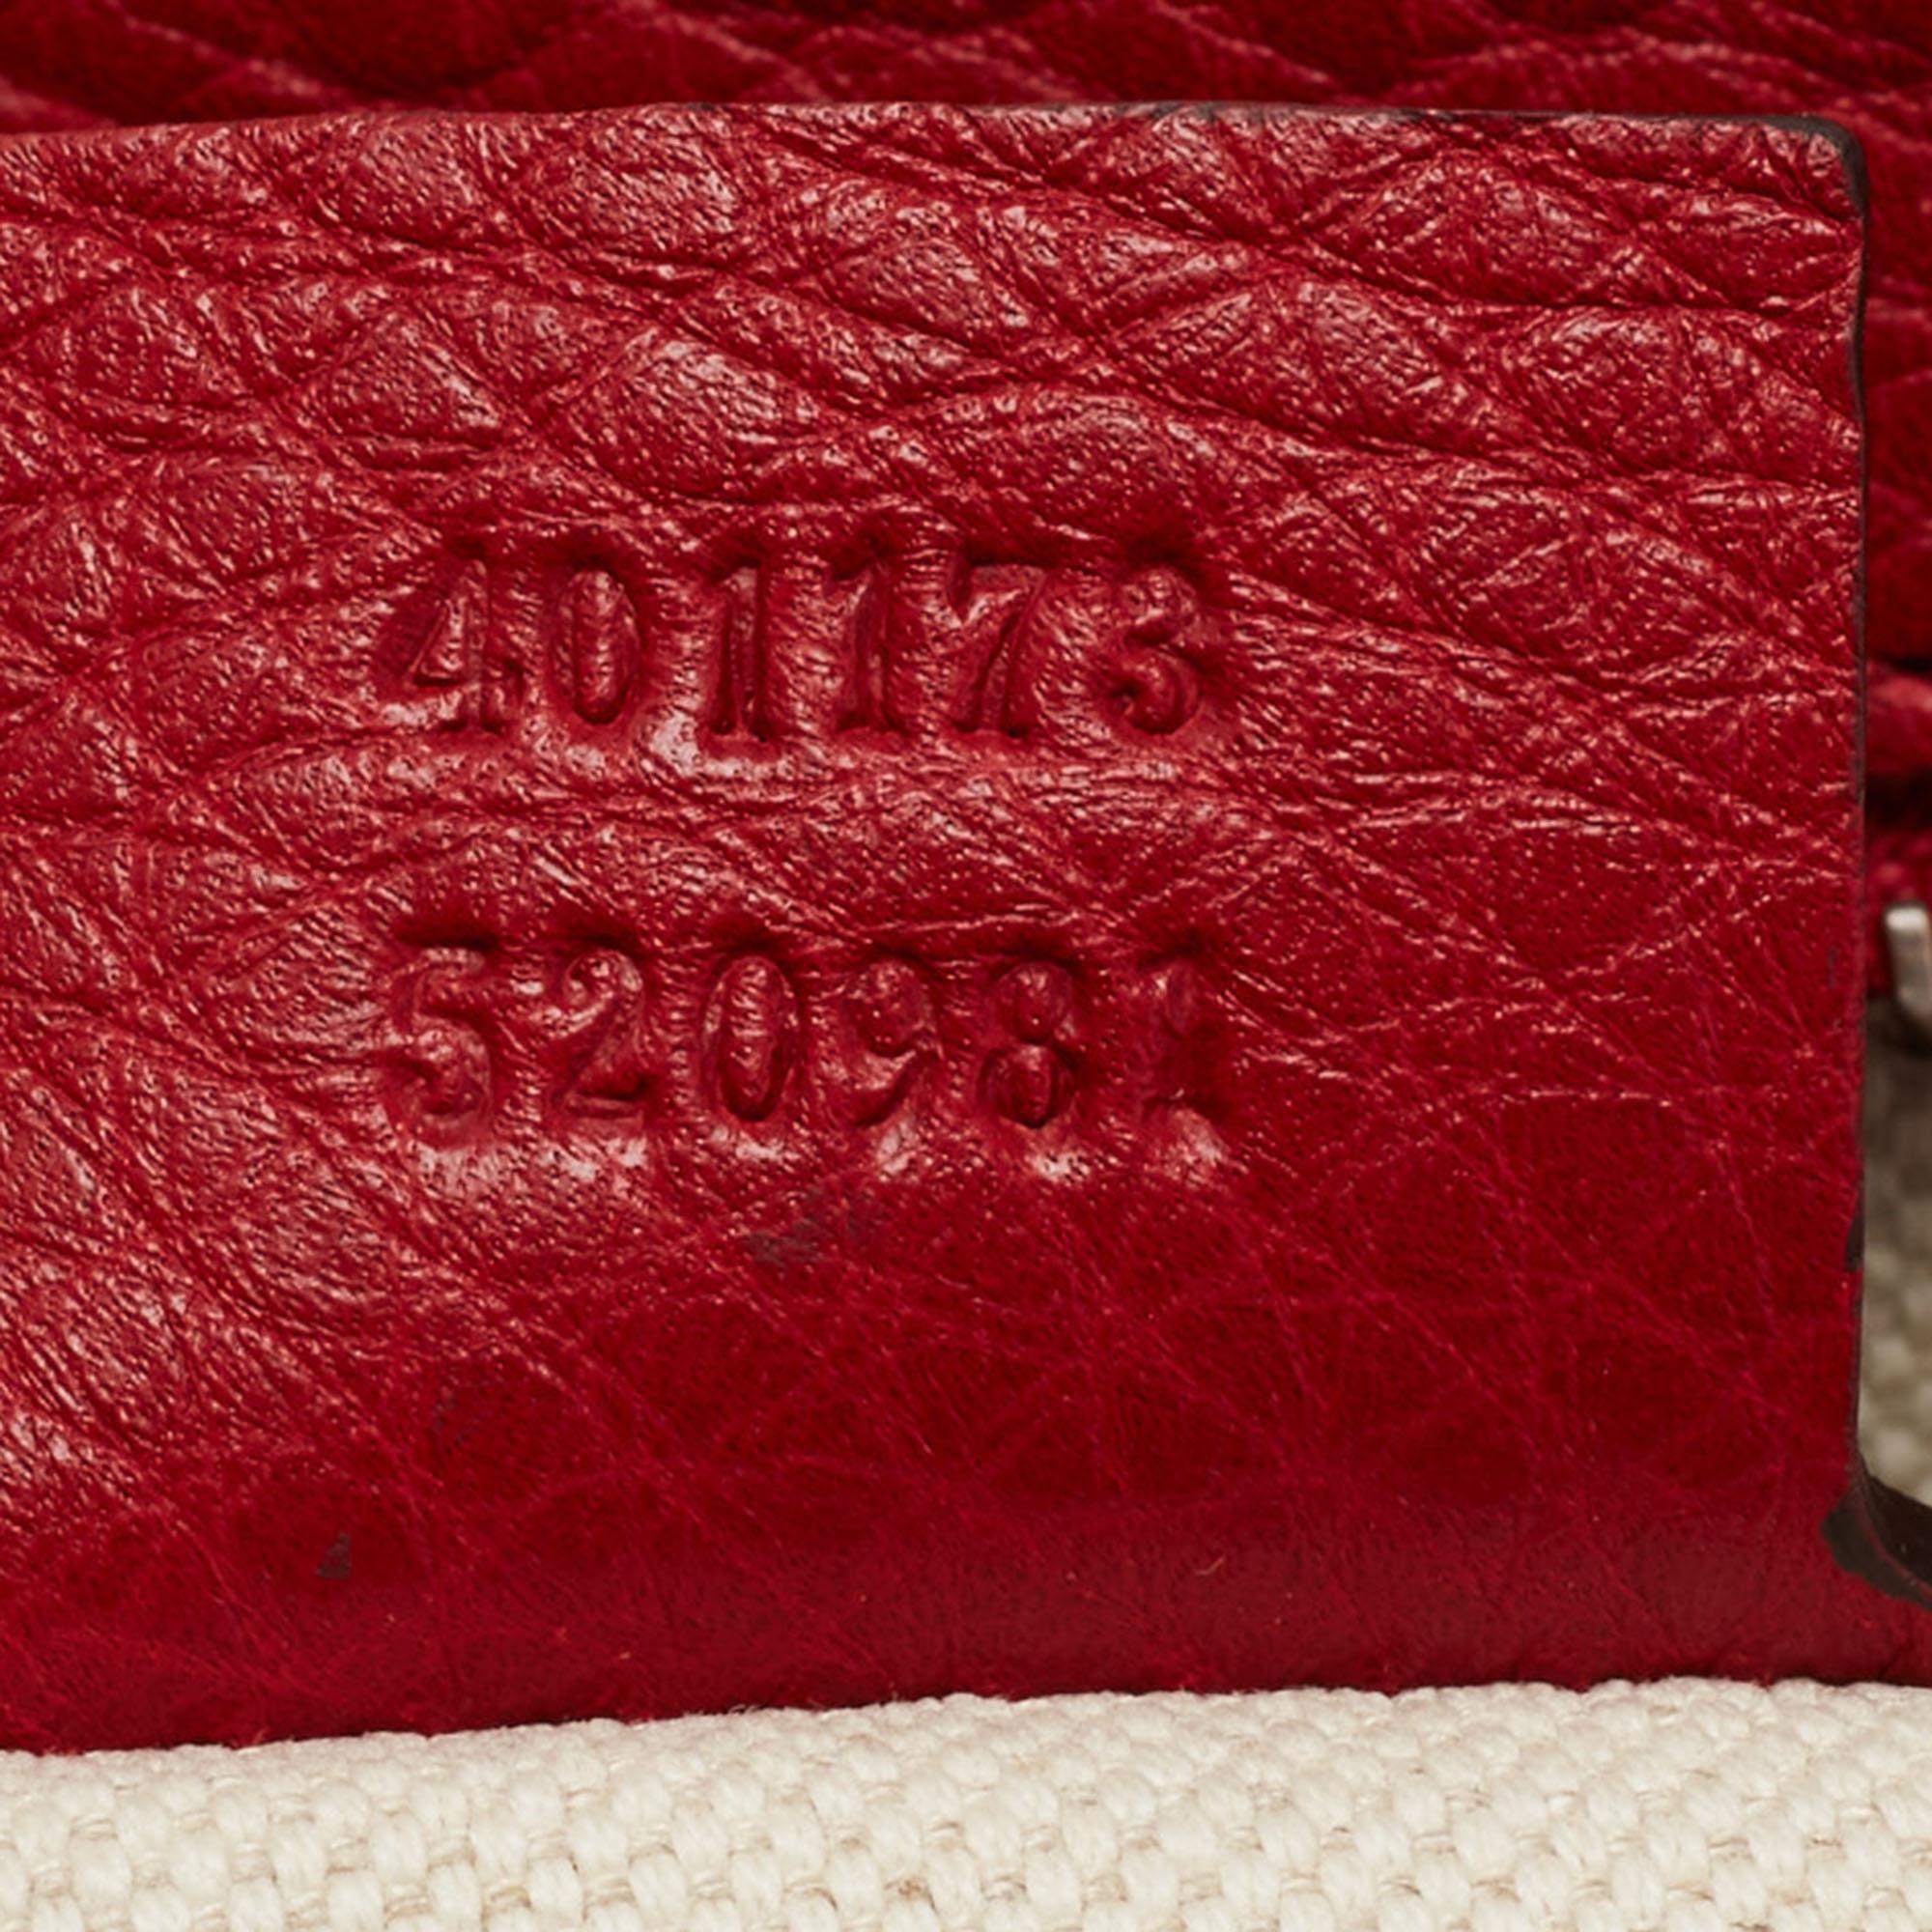 Gucci Red Leather GG Marmont Shoulder Bag 5